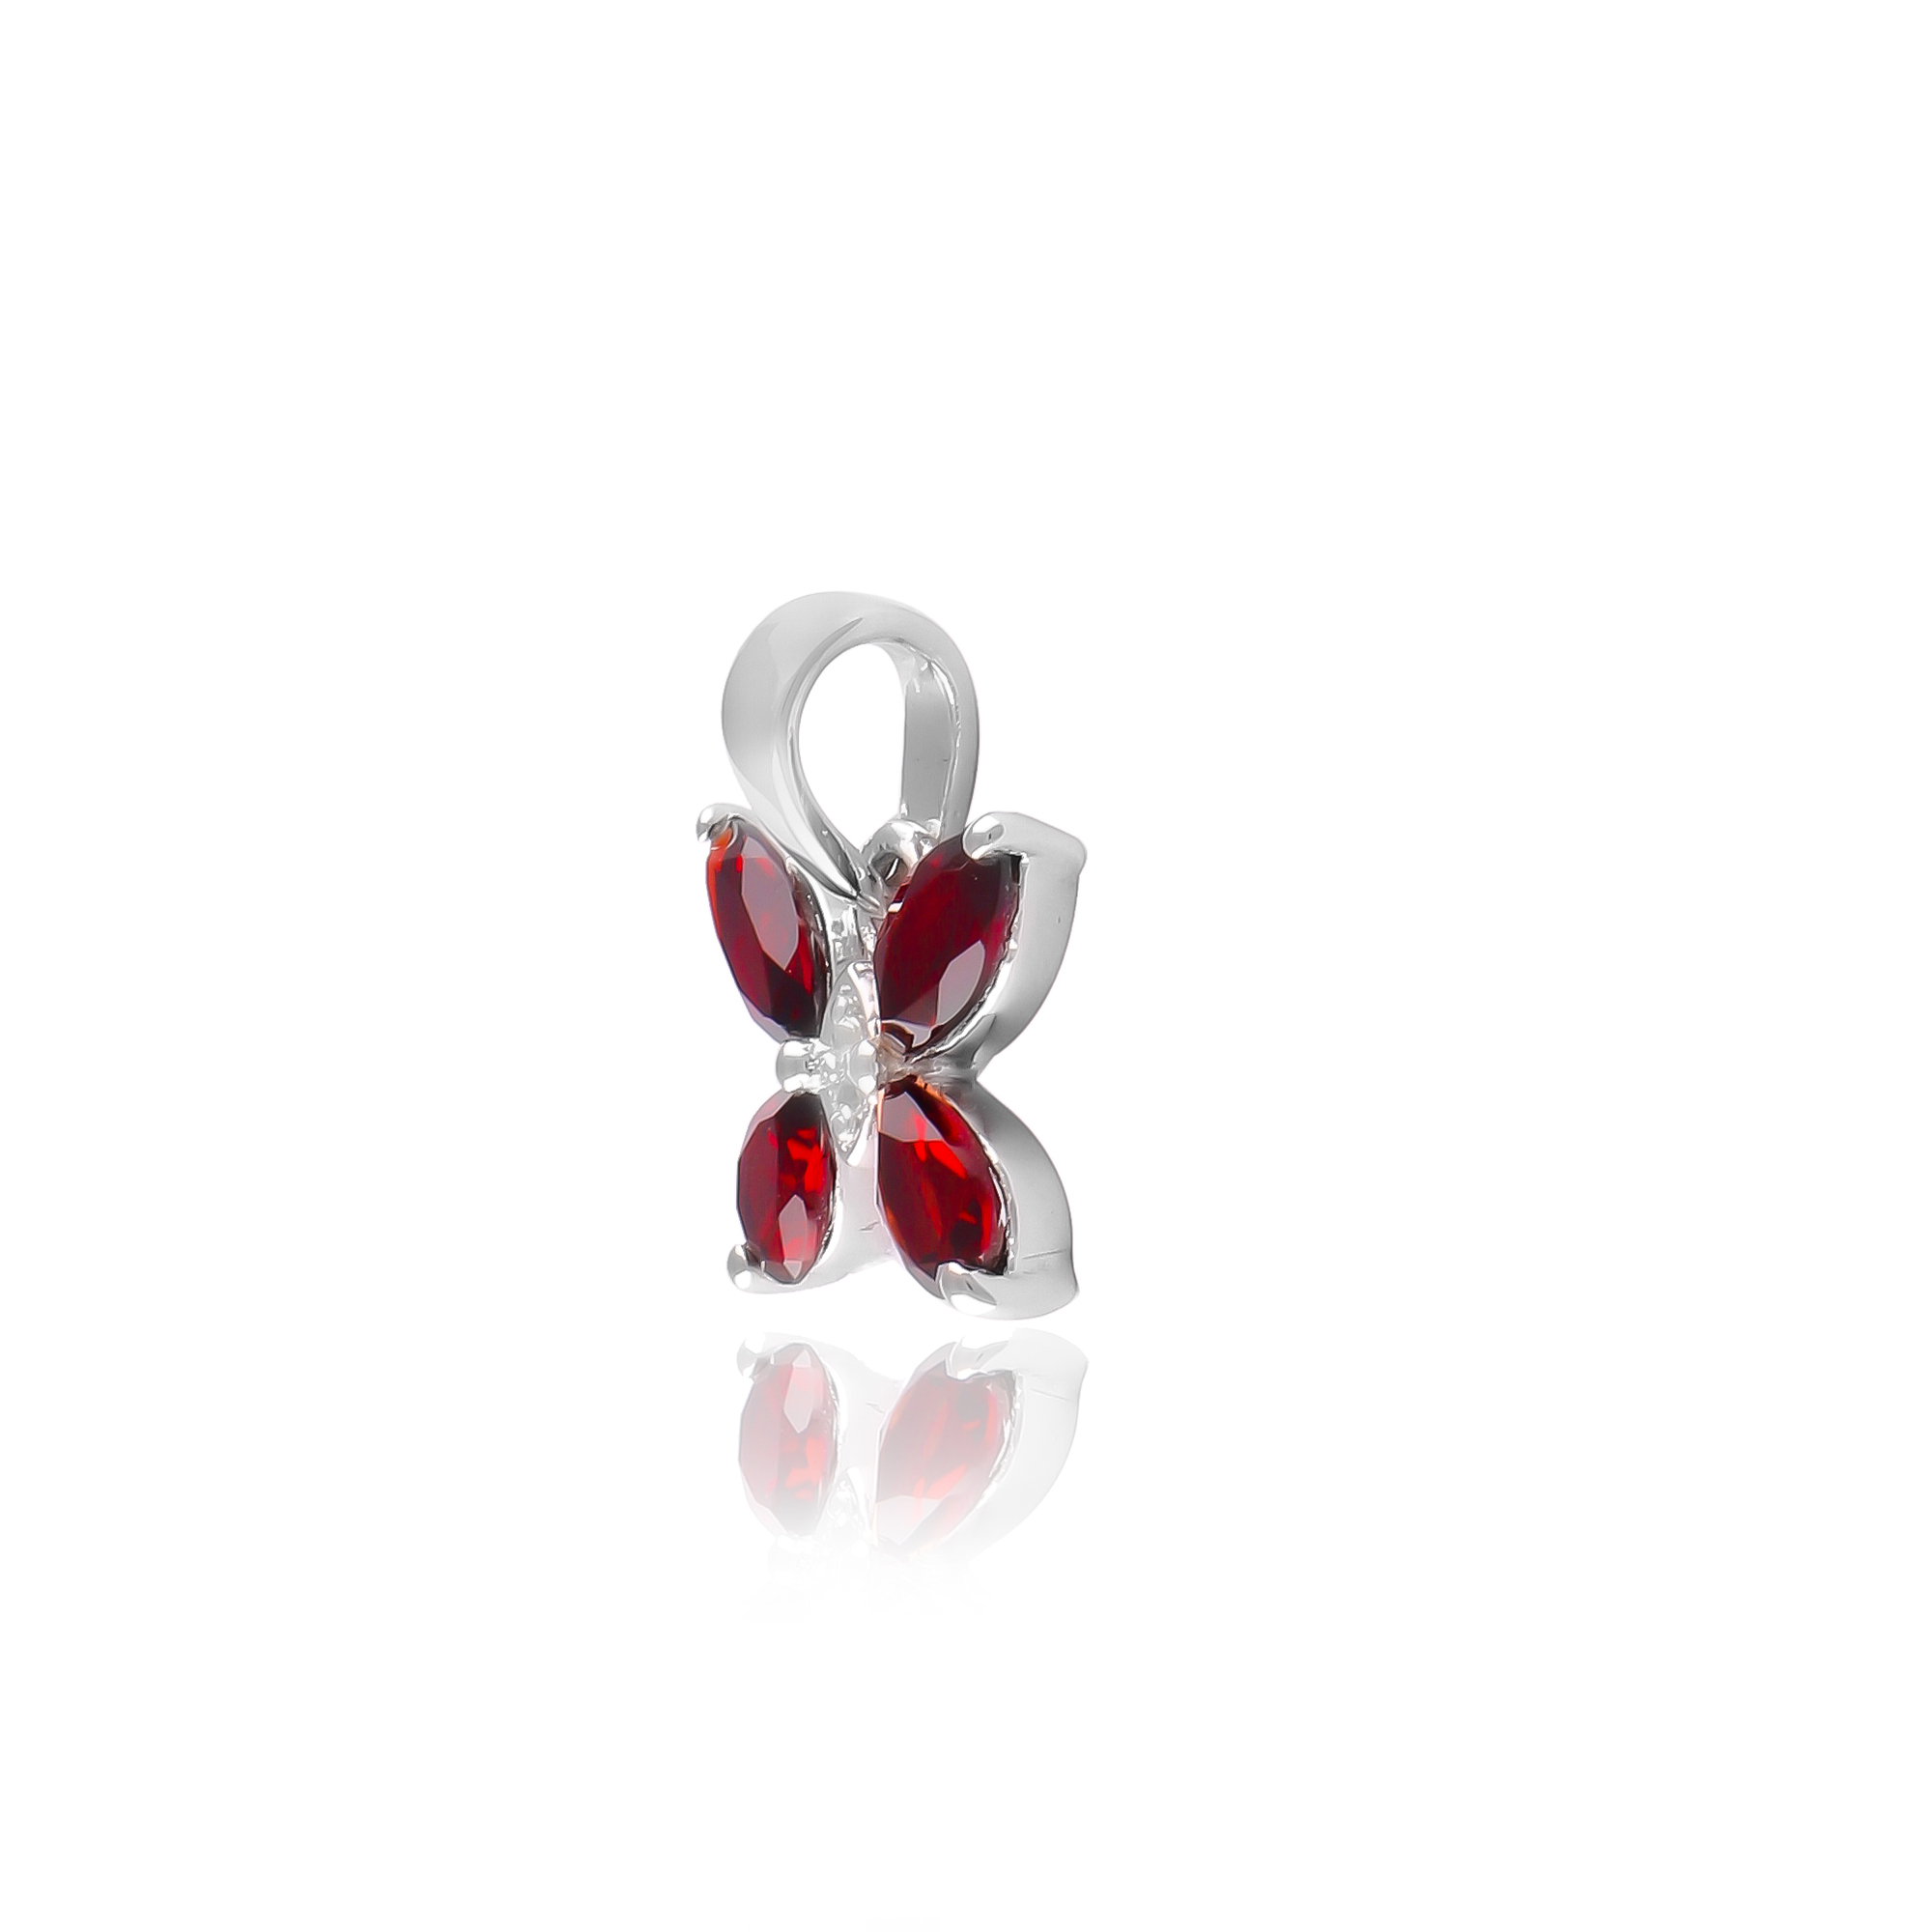 Butterfly pendant in Garnet with Chain